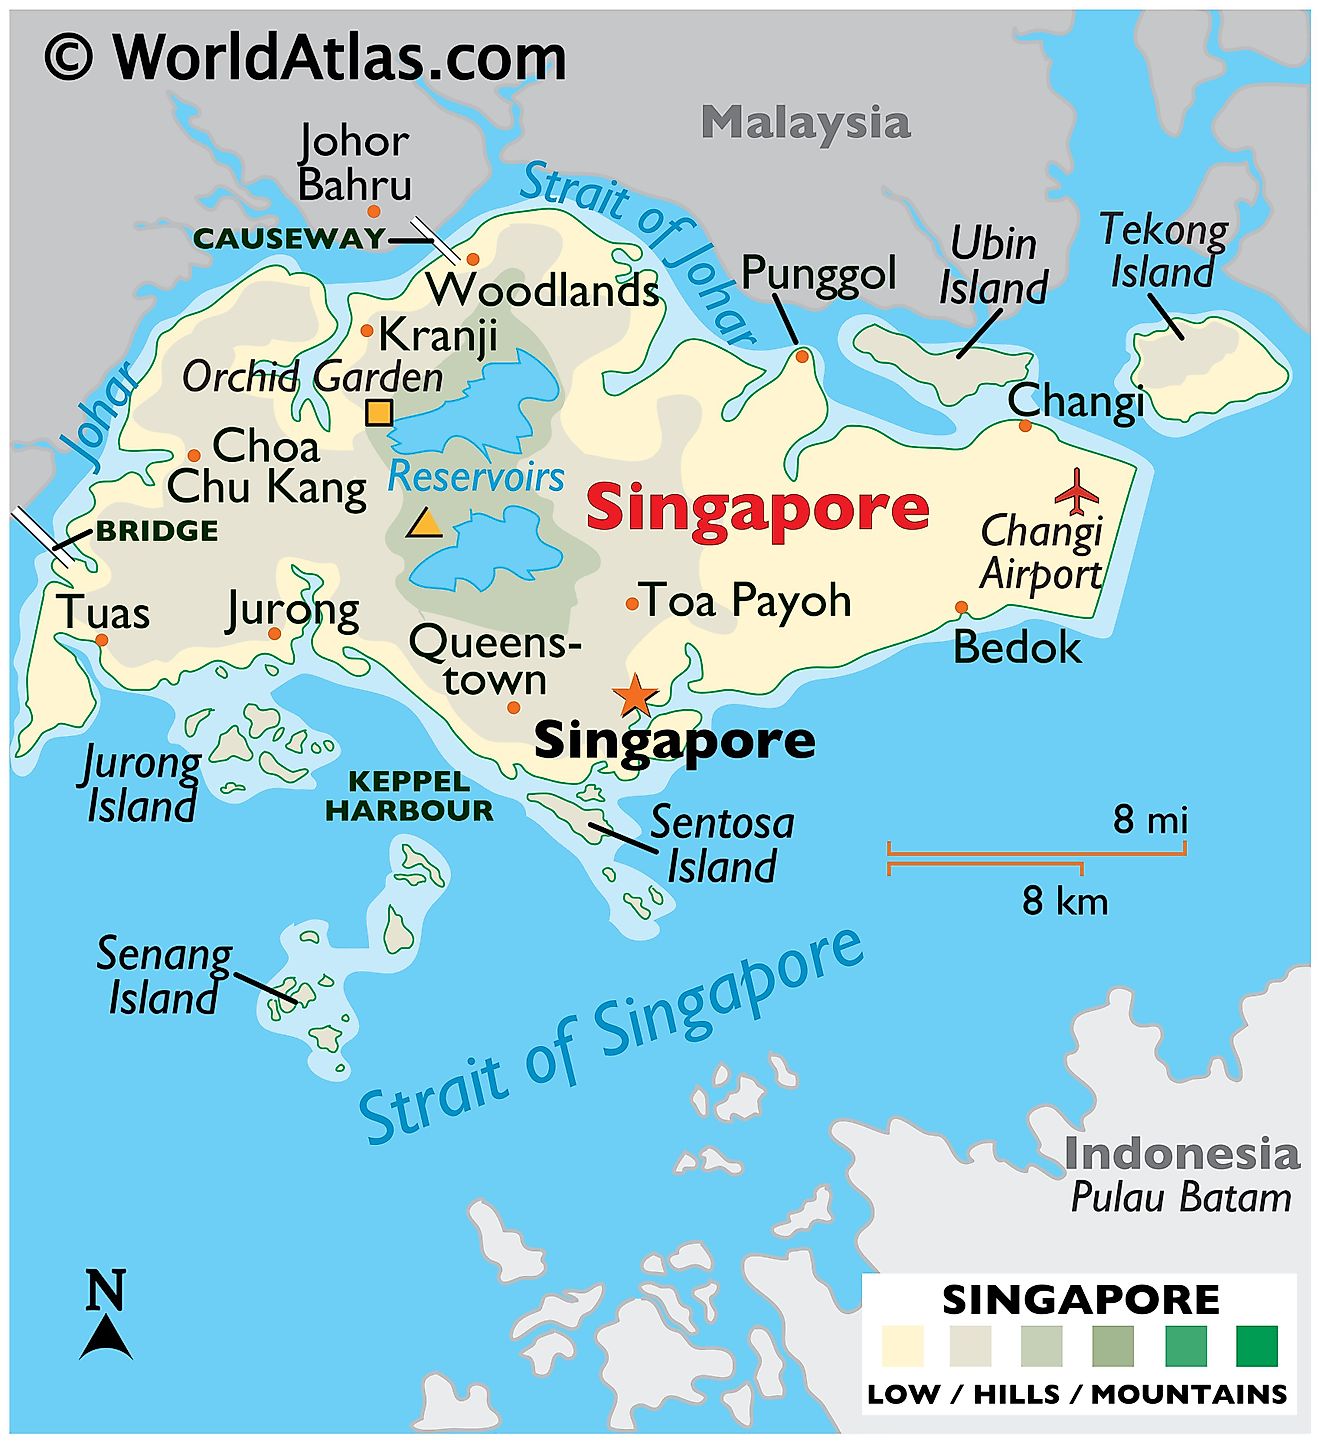 Seasia.co - The world map which we normally see is not